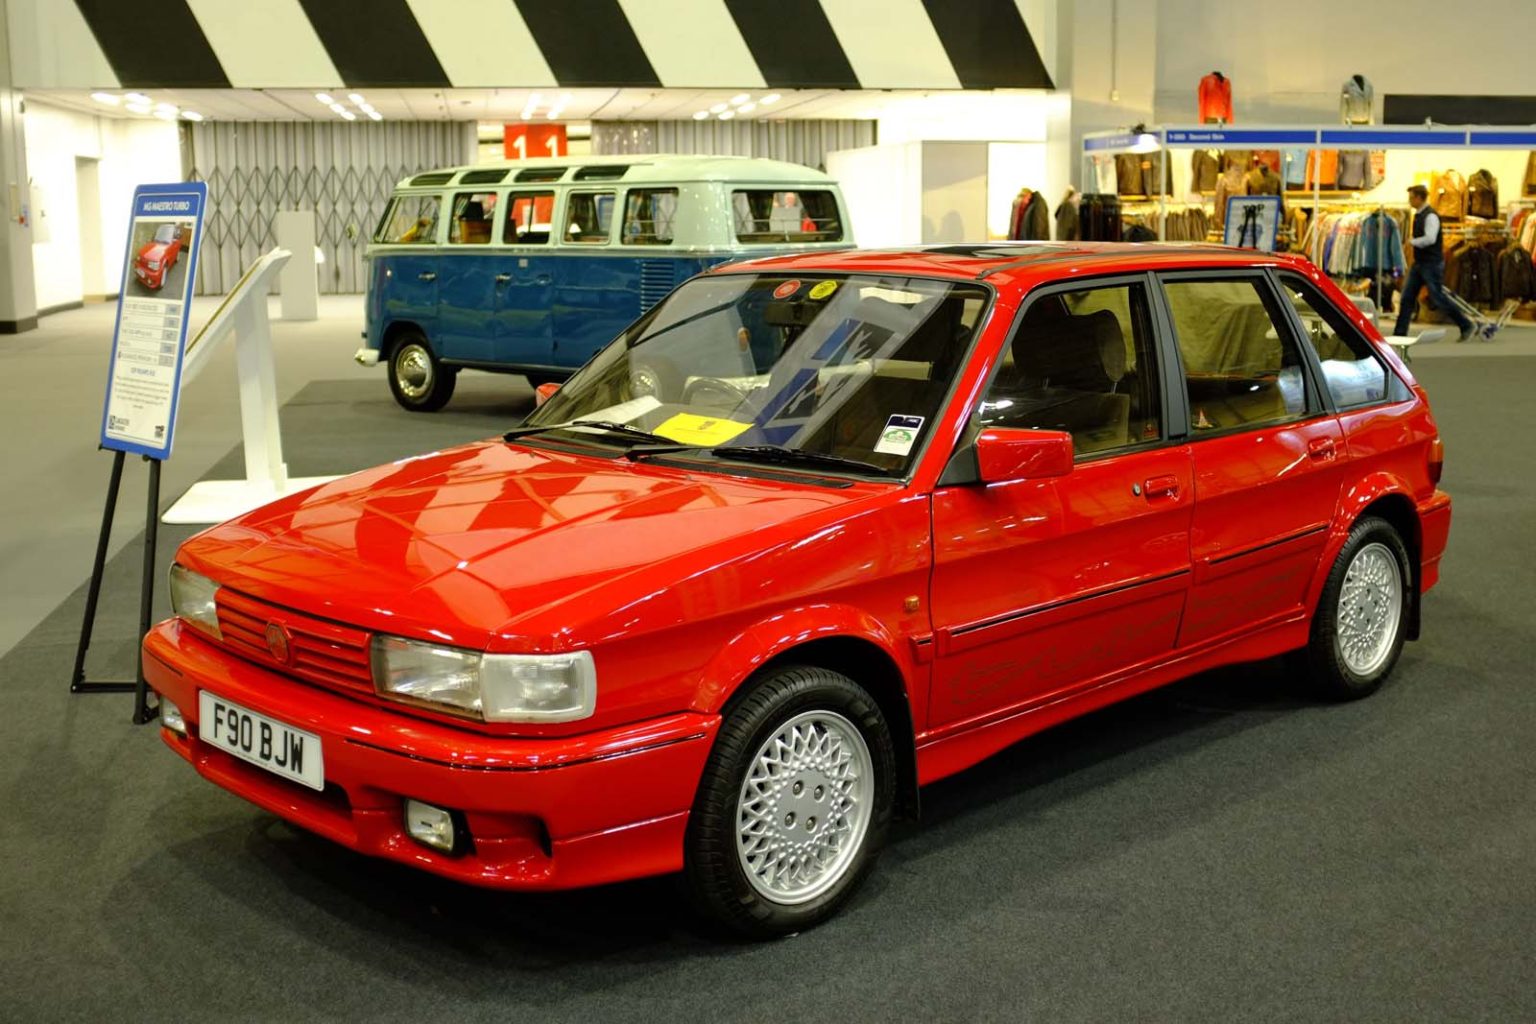 MG Maestro Turbo - Can I Display Black And Silver Number Plates On My Classic Car Or Motorcycle?